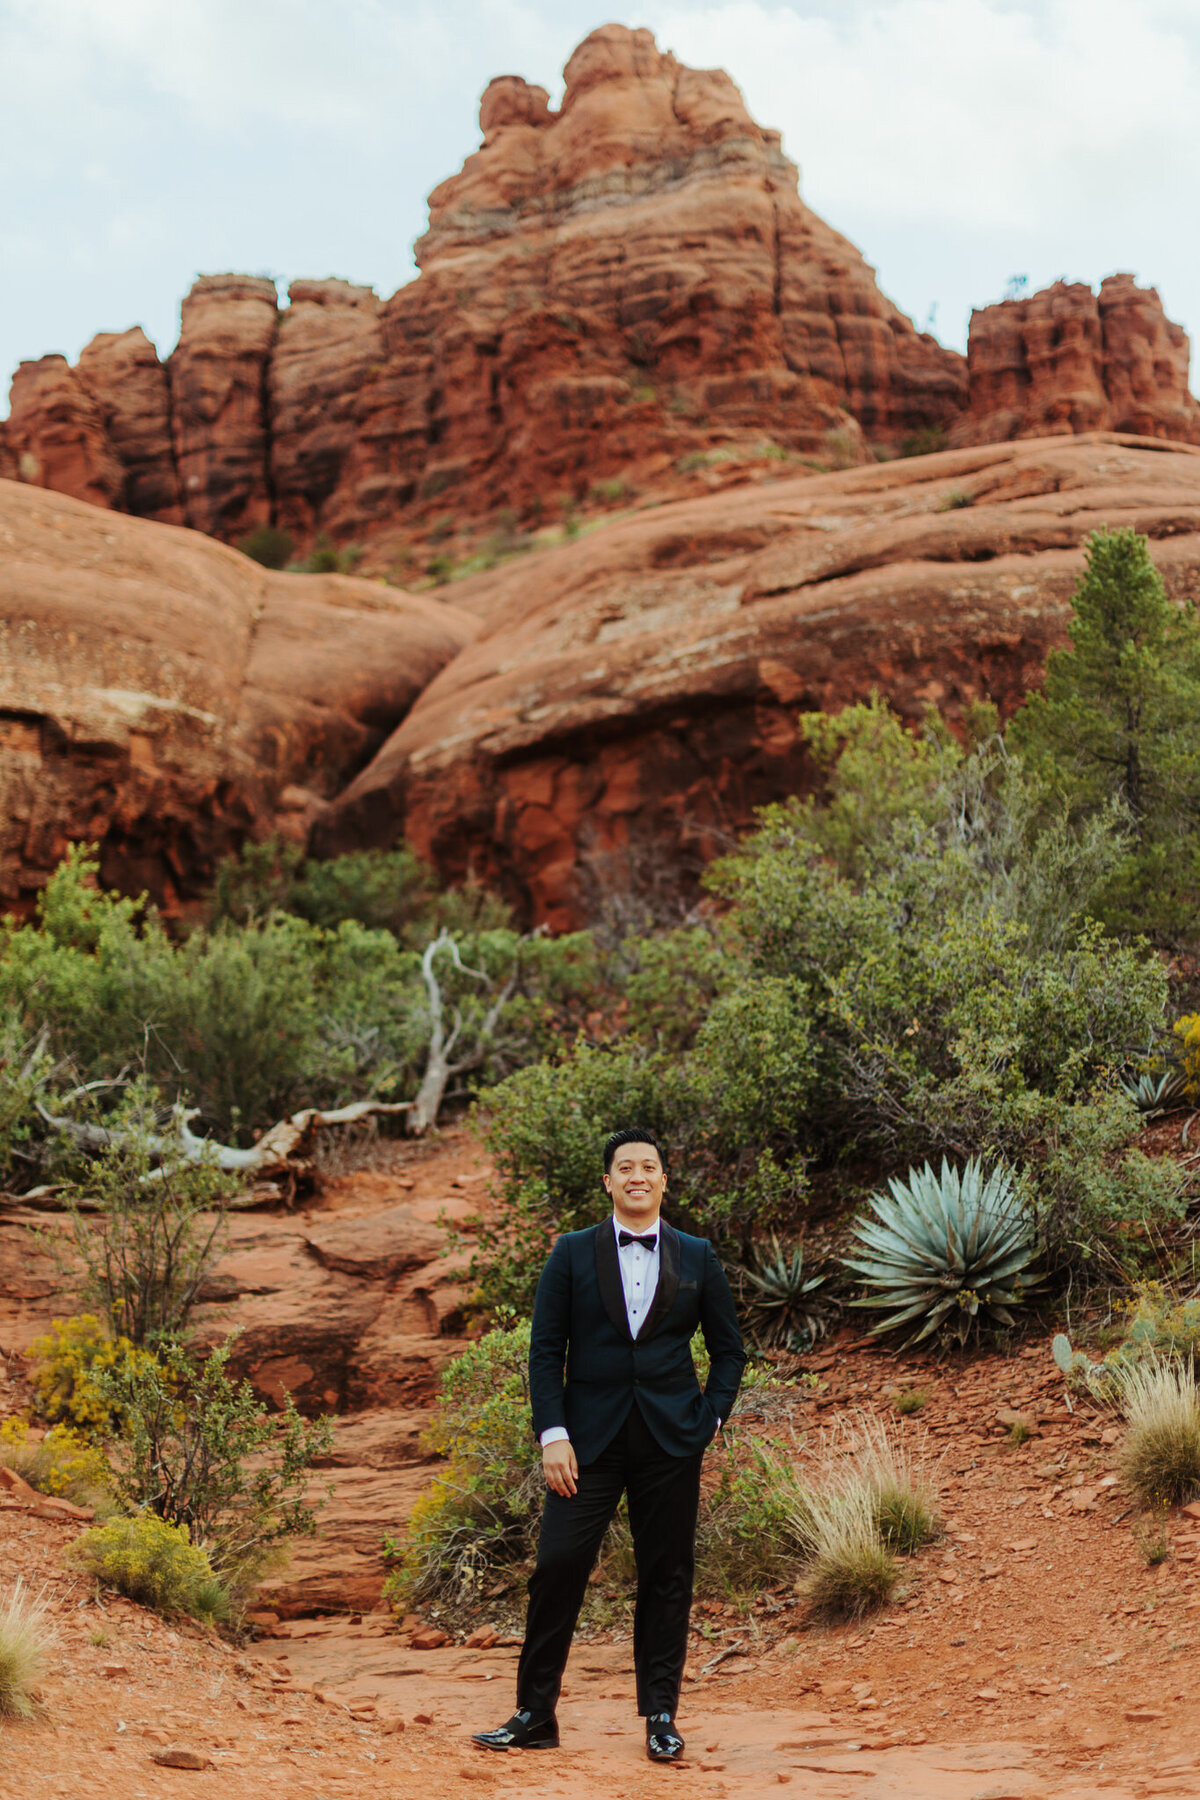 groom stand sin front of bell rock for wedding photo